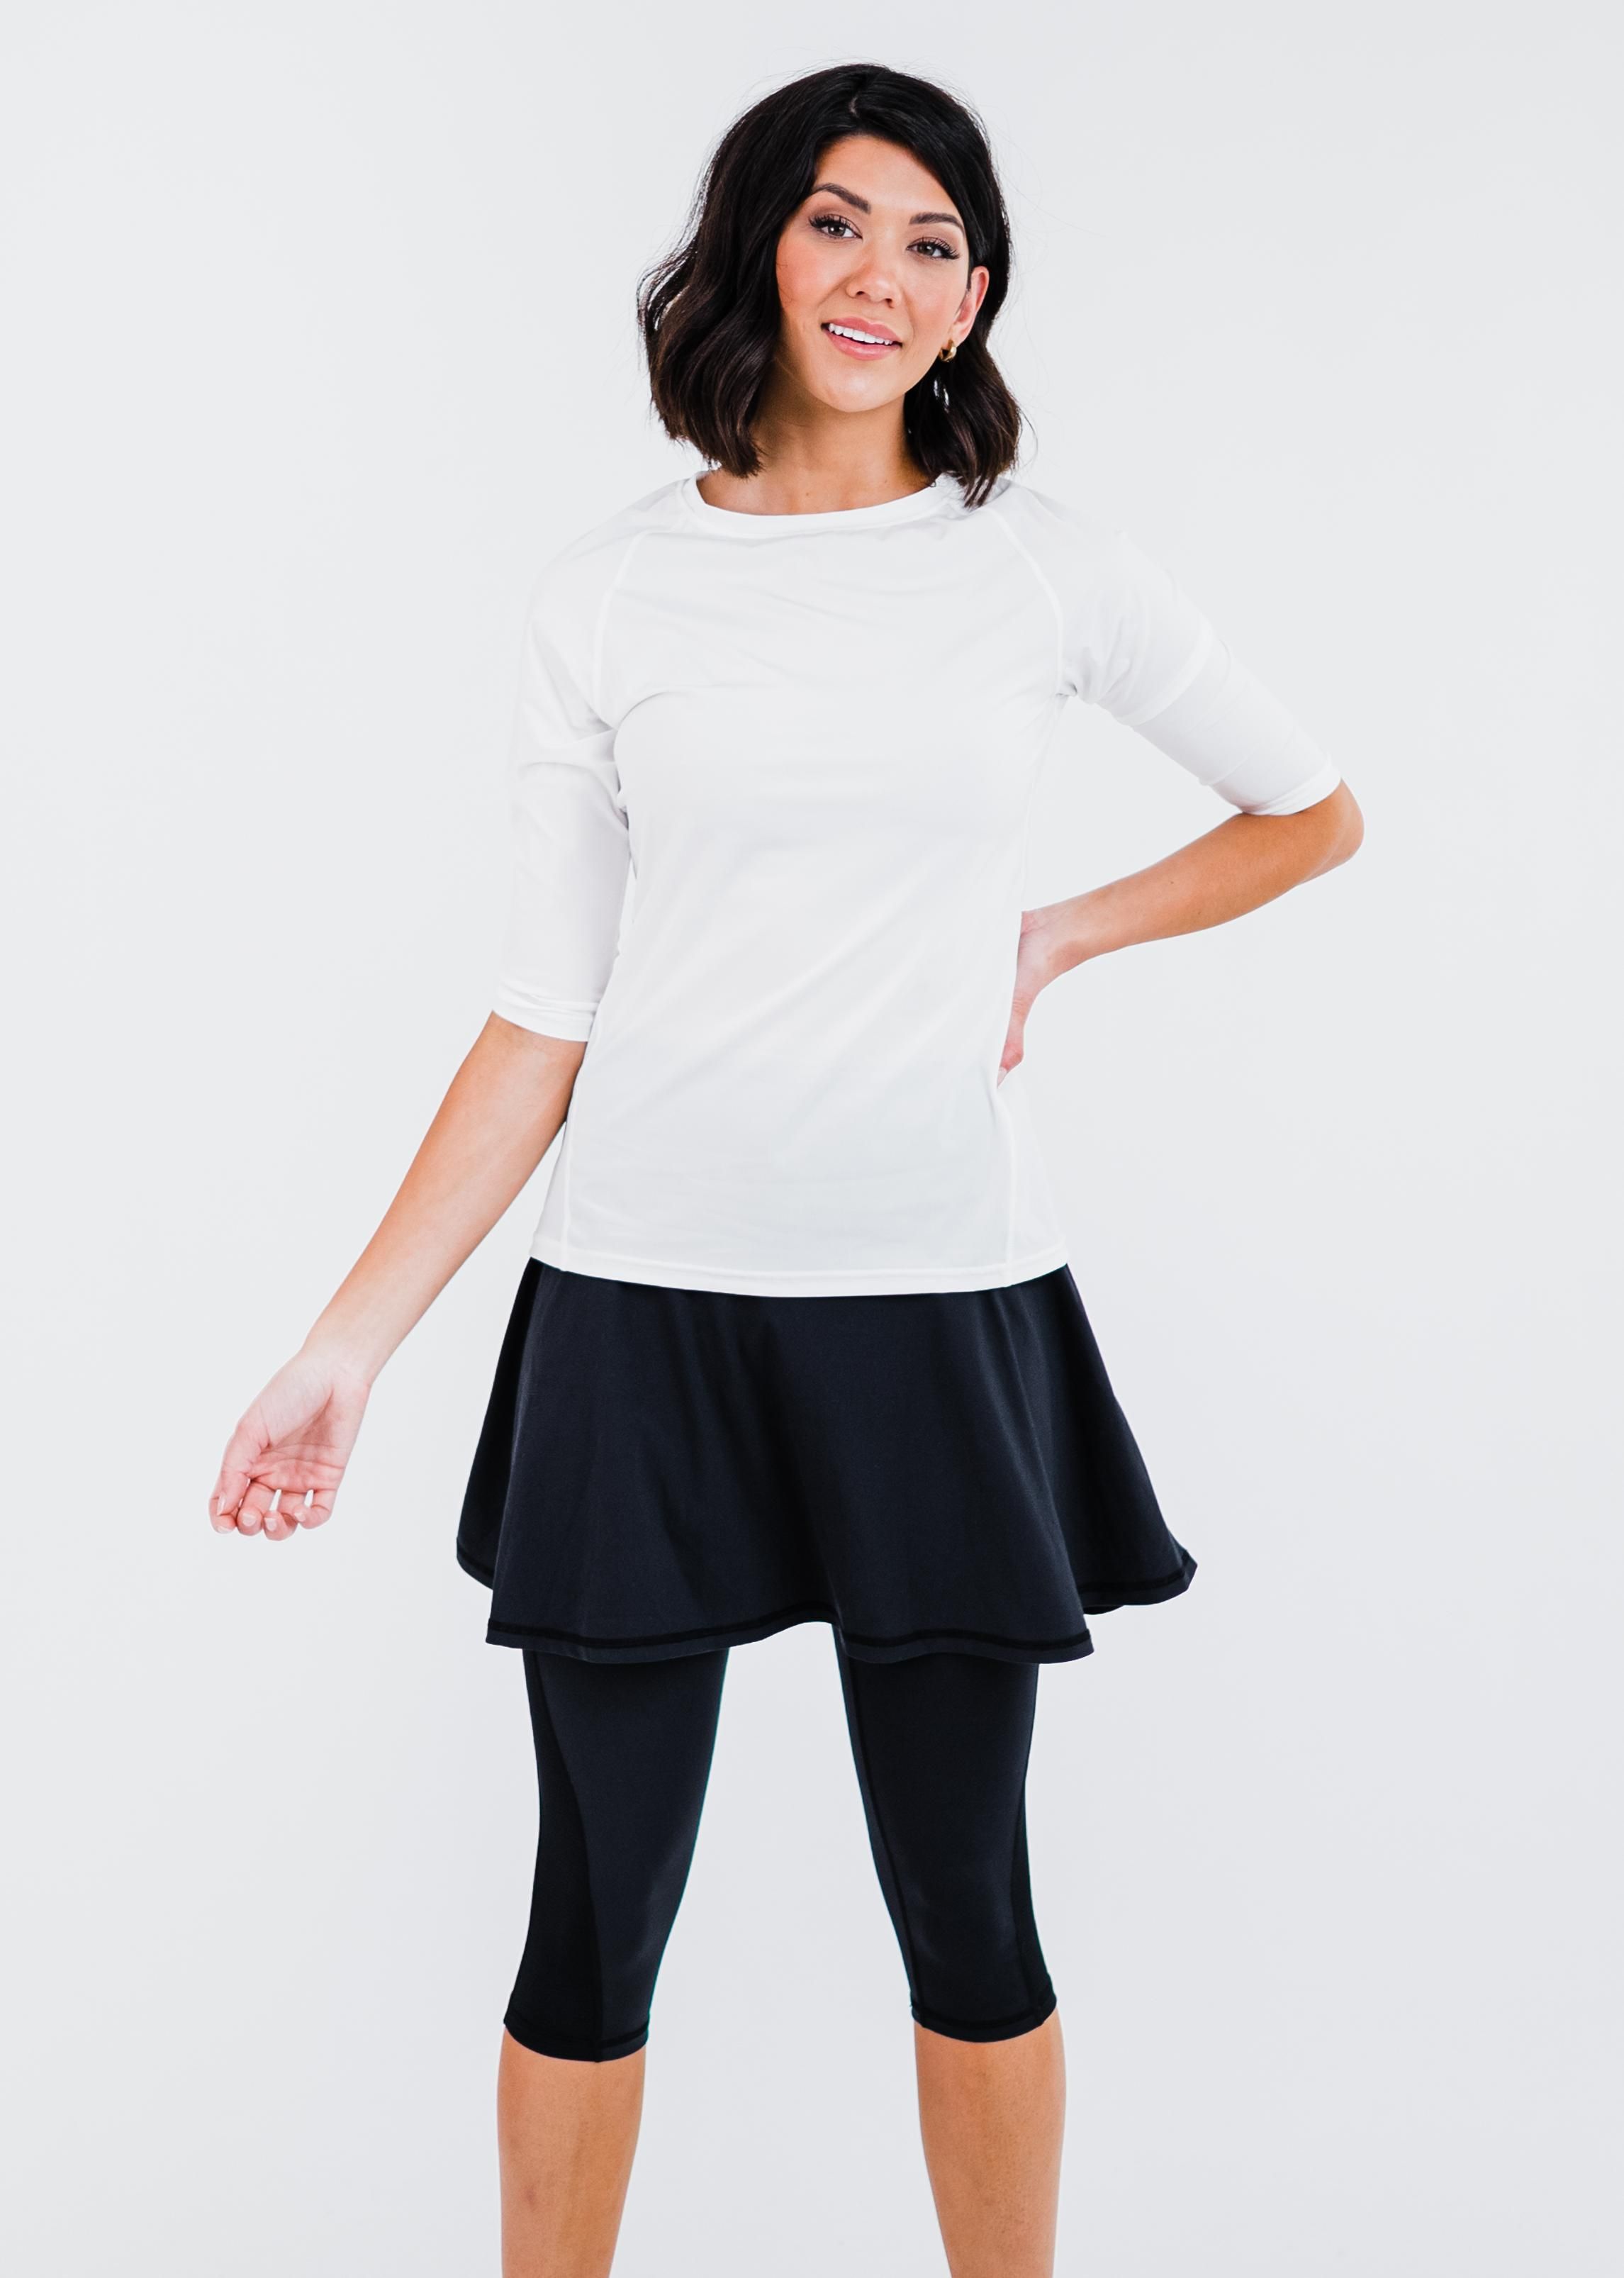 Pro 3/4 Sleeve Performance Top With Flowy Lycra® Sport Skirt With Attached 17" Leggings